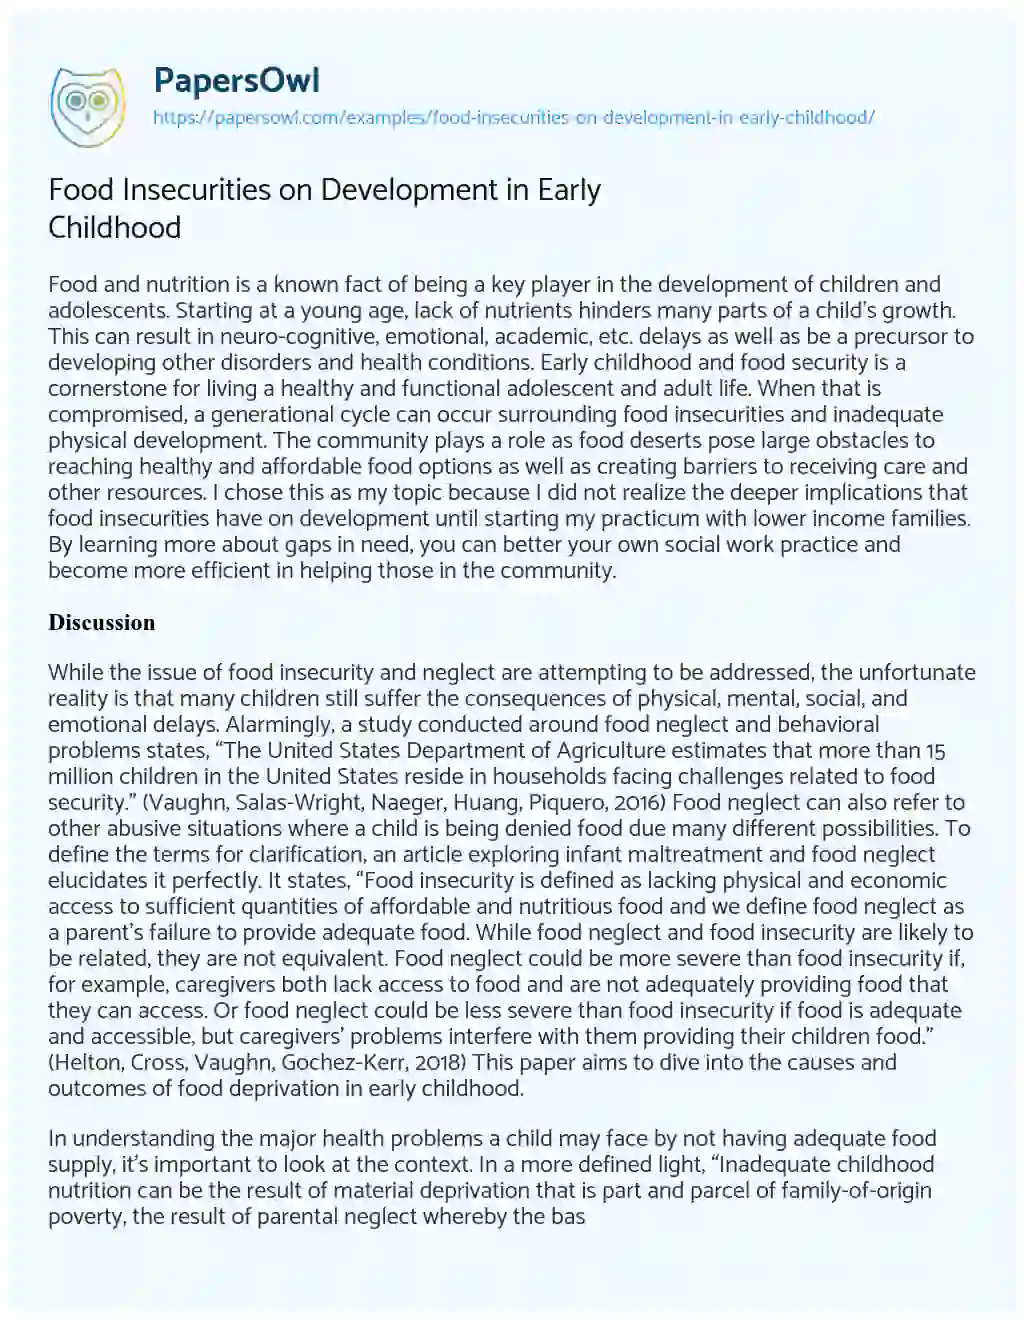 Food Insecurities on Development in Early Childhood essay